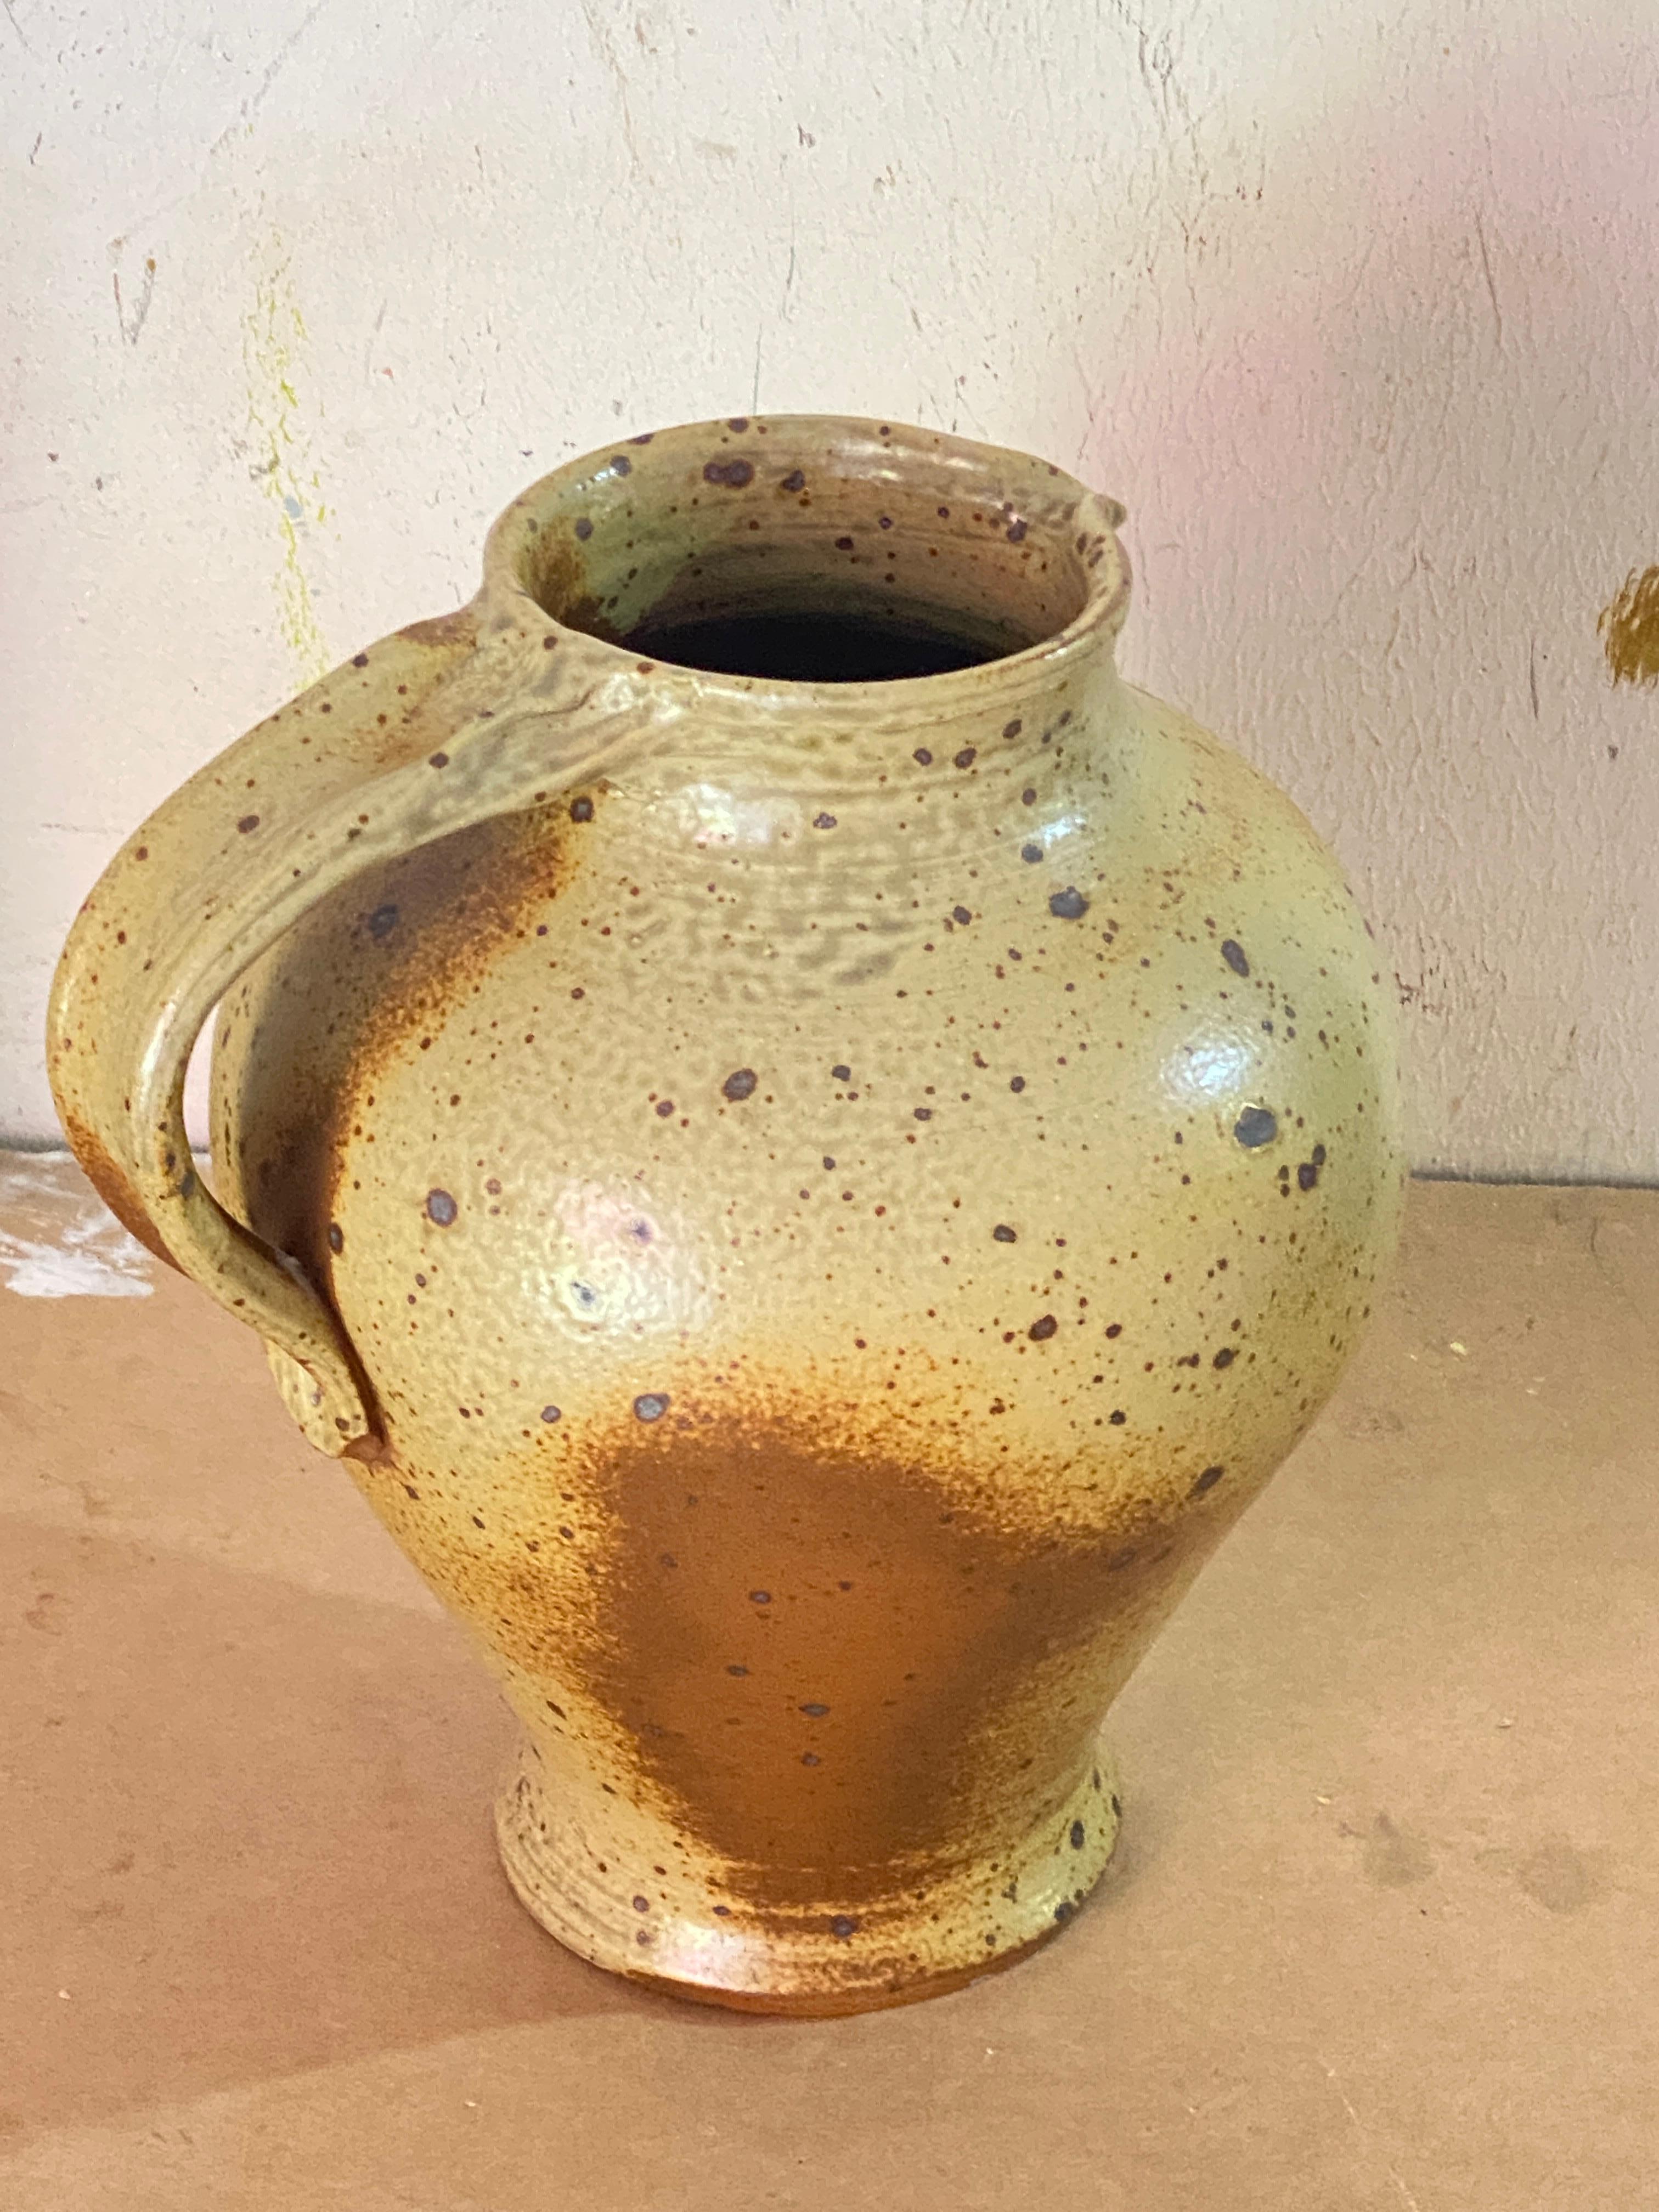 Jug or pitcher, with an exceptional patina. It's color with beige and brown gives very pleasant contrasts. This Pitcher was created in France in the 1960s.